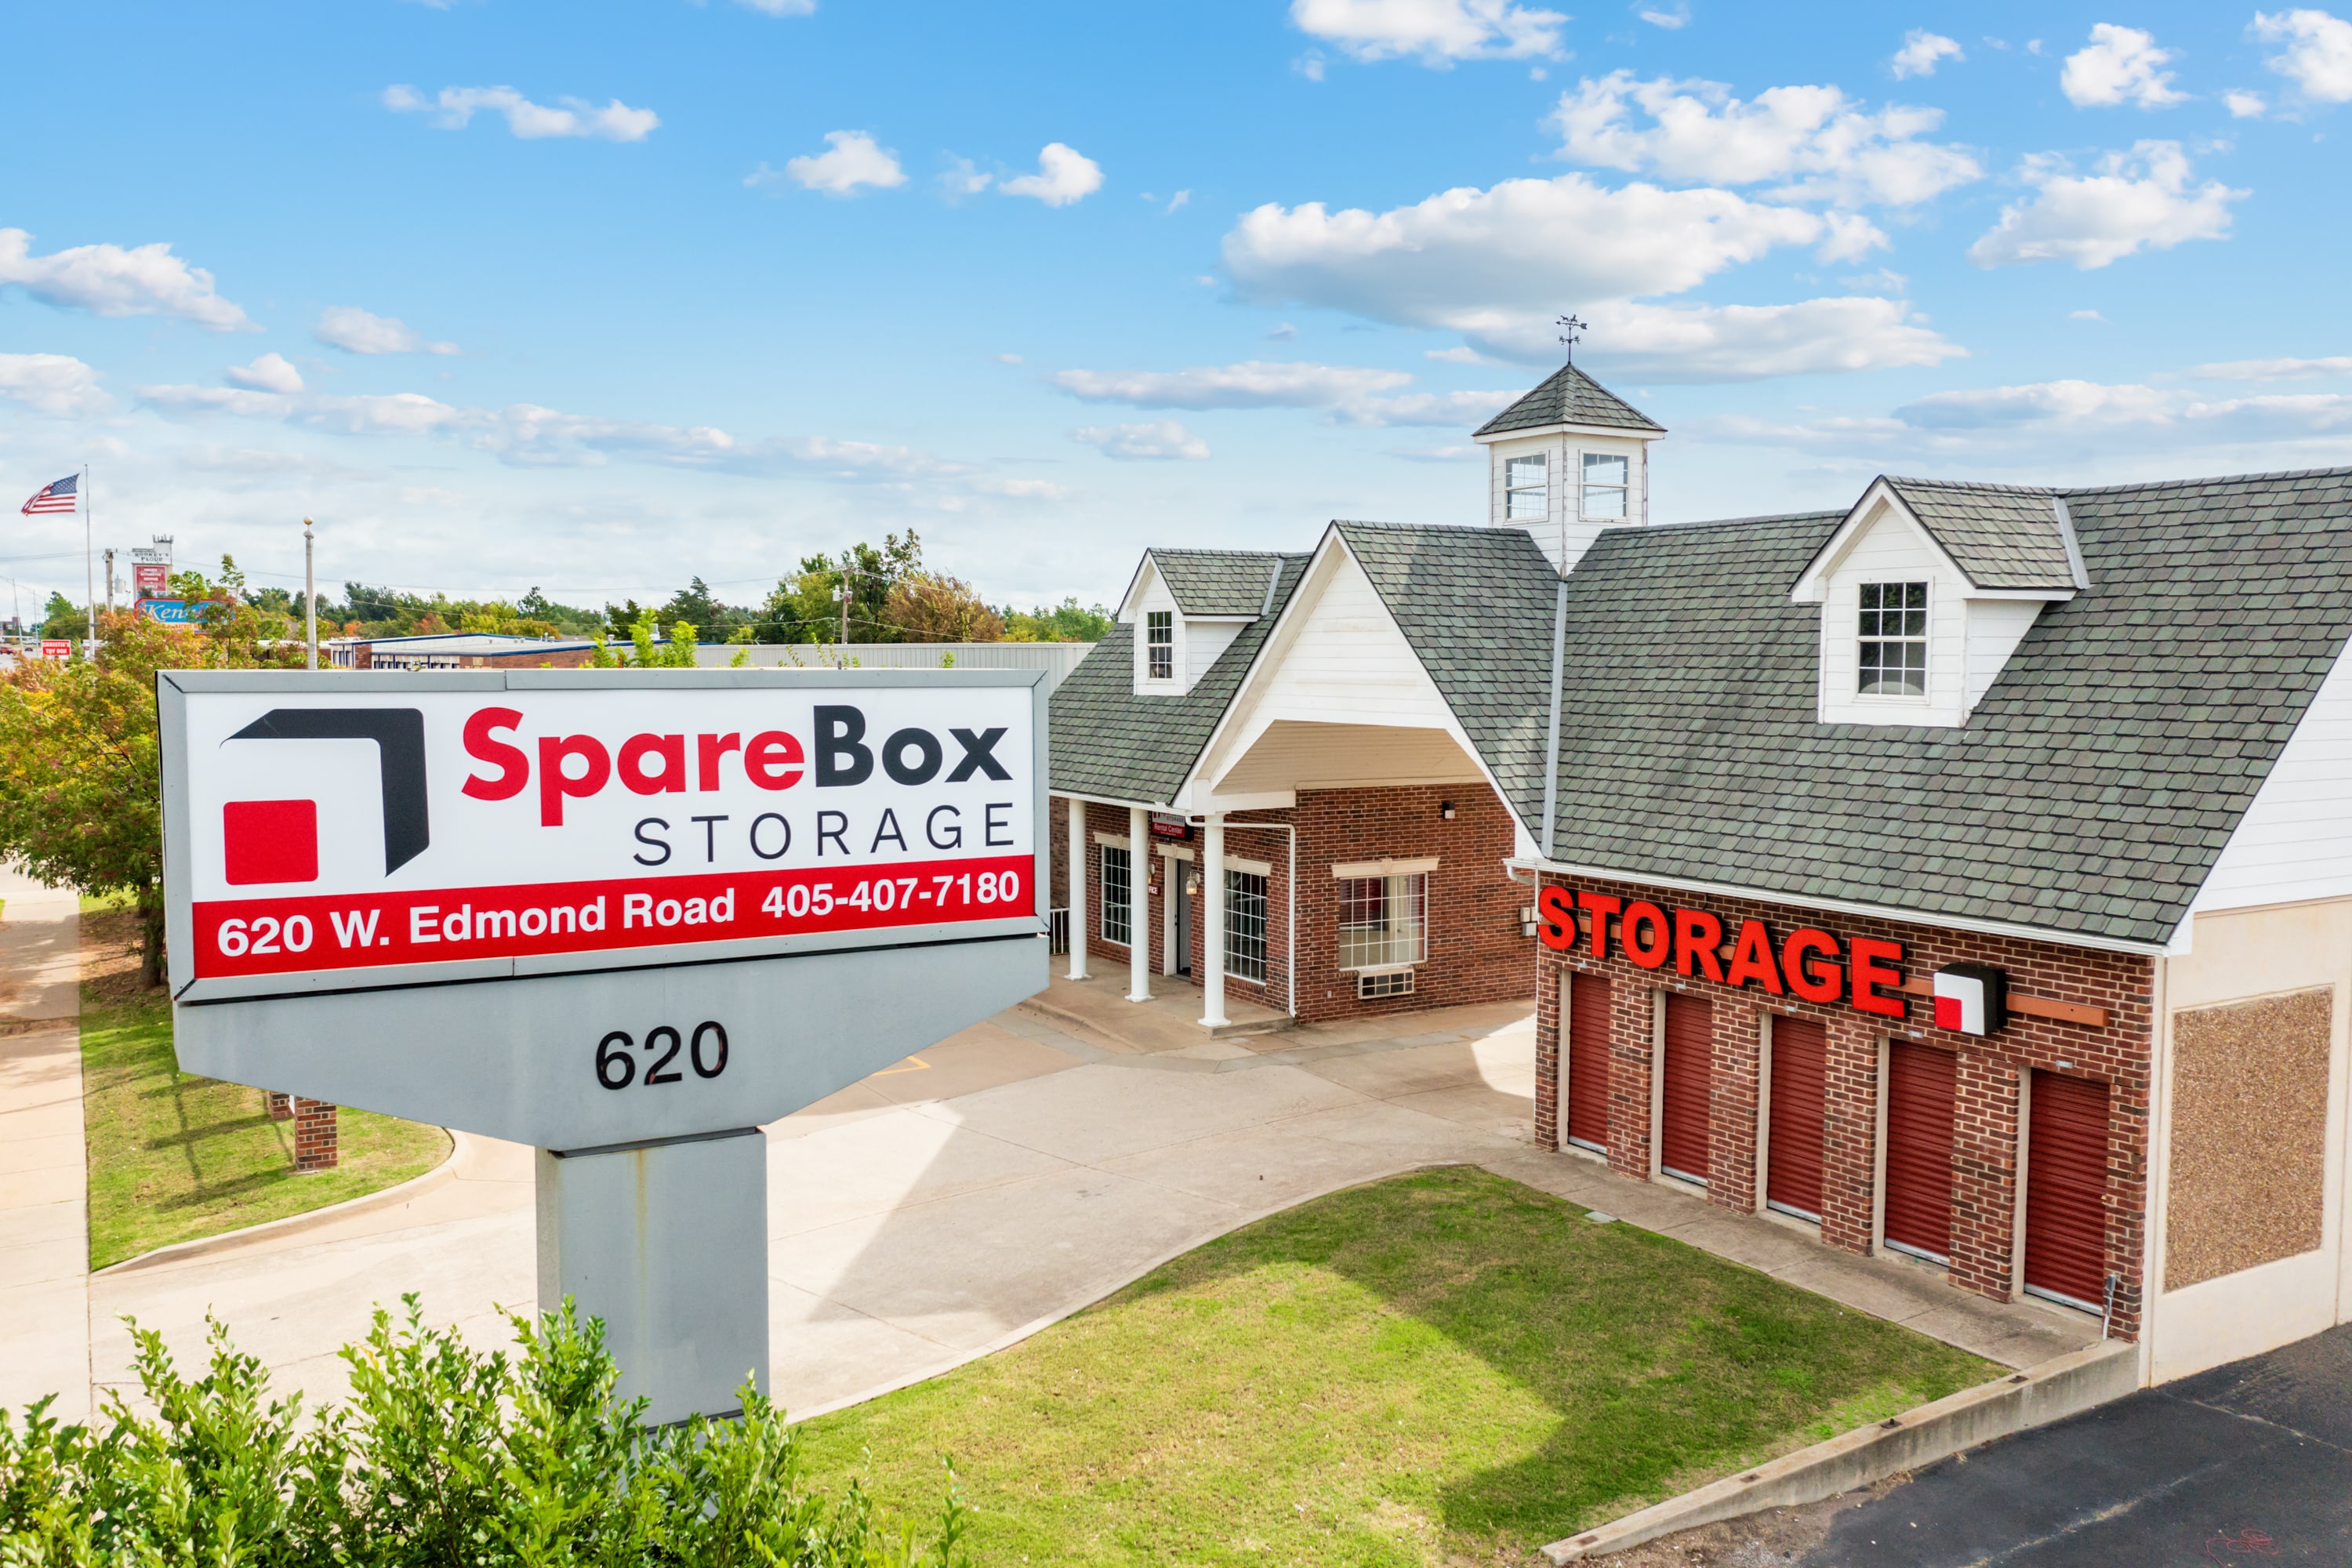 Meet all your self storage needs in Edmond, OK with our Edmond Road location | SpareBox Storage